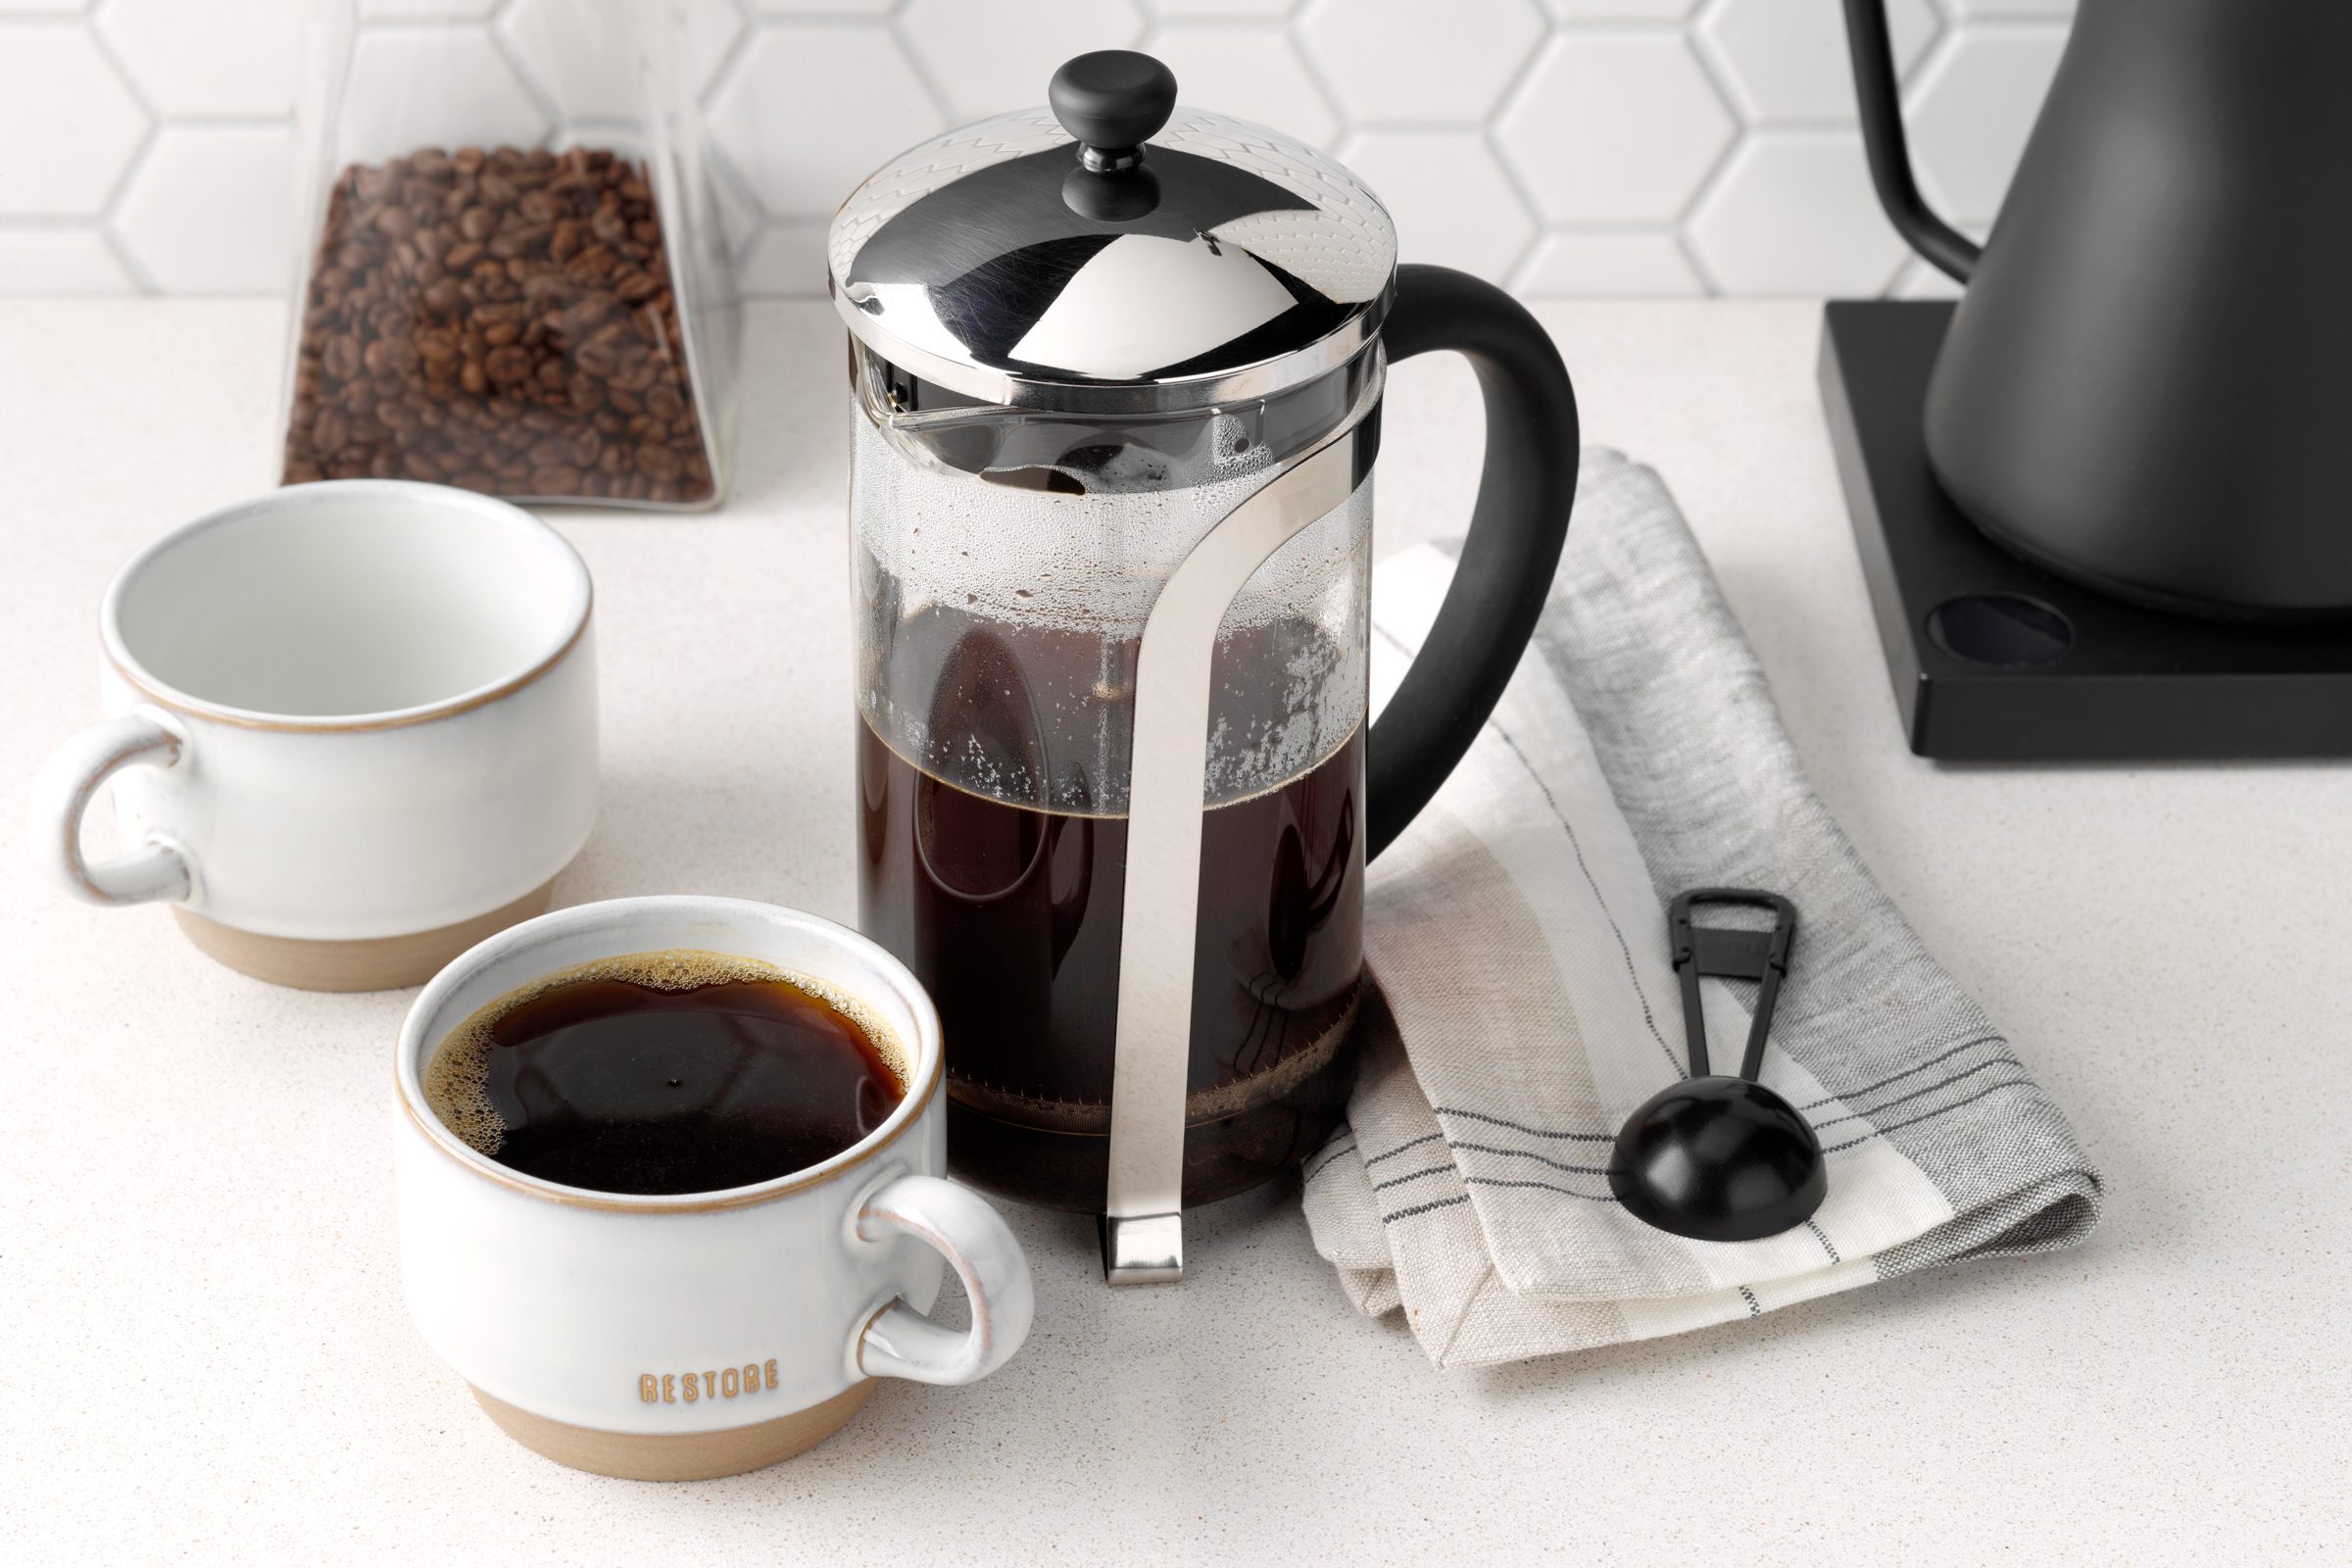 Mr. Coffee Iced Tea Maker Delivers Southern Tea in Minutes